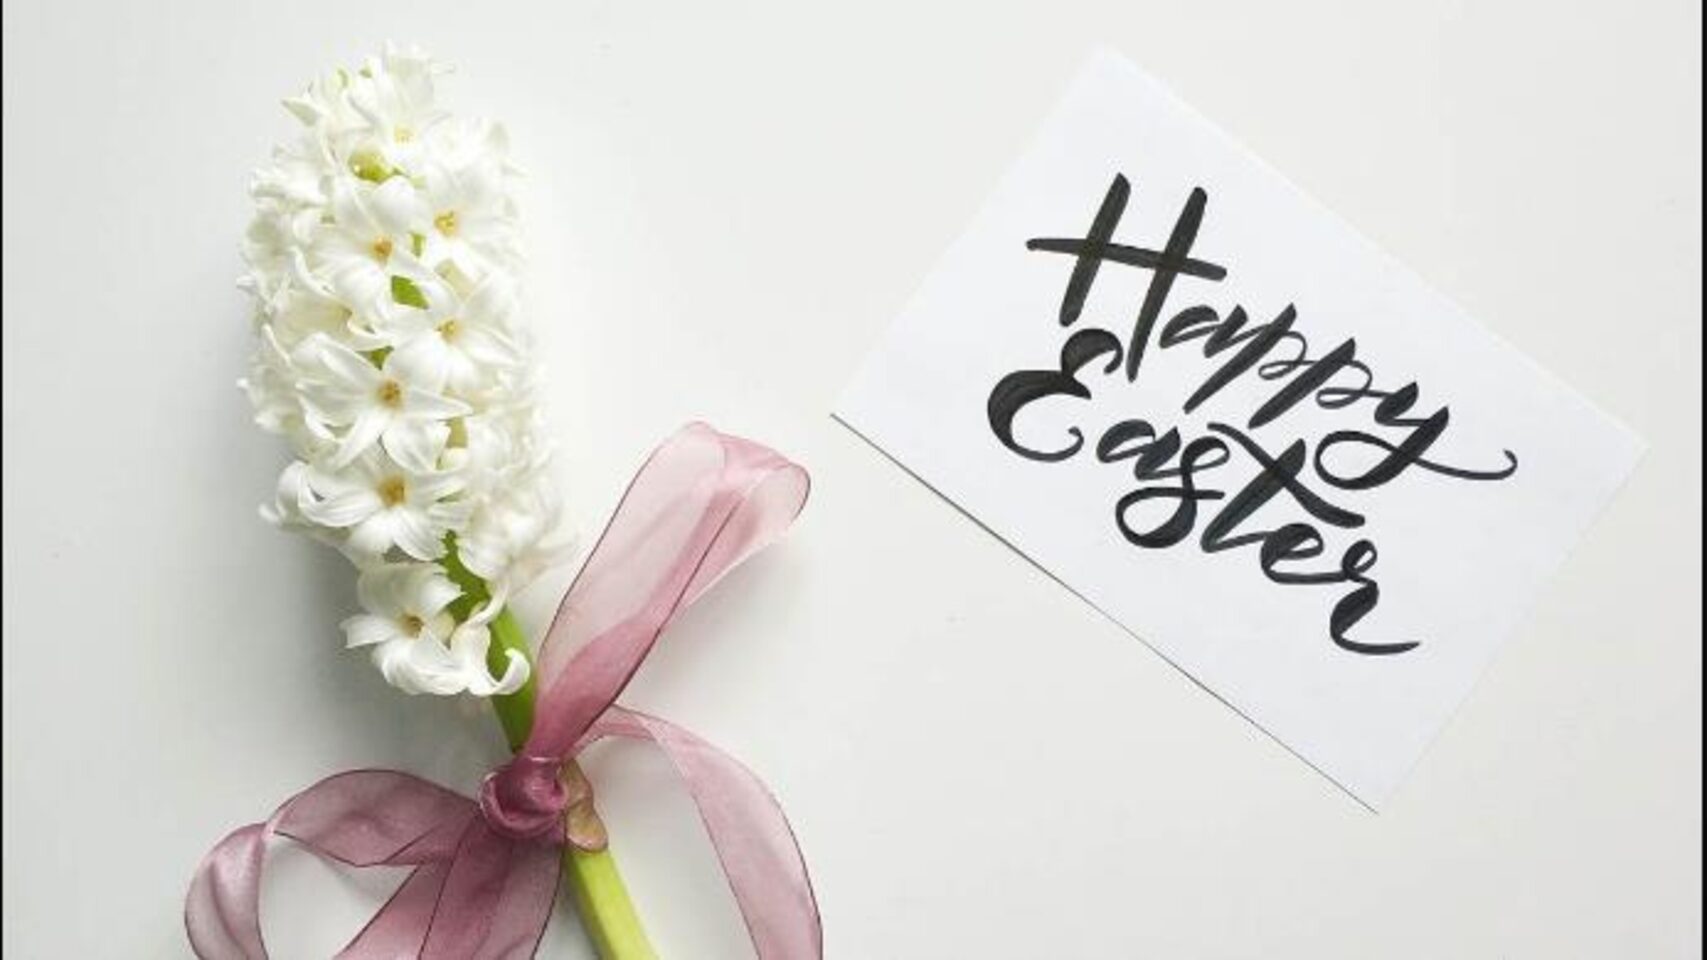 Happy Easter to all